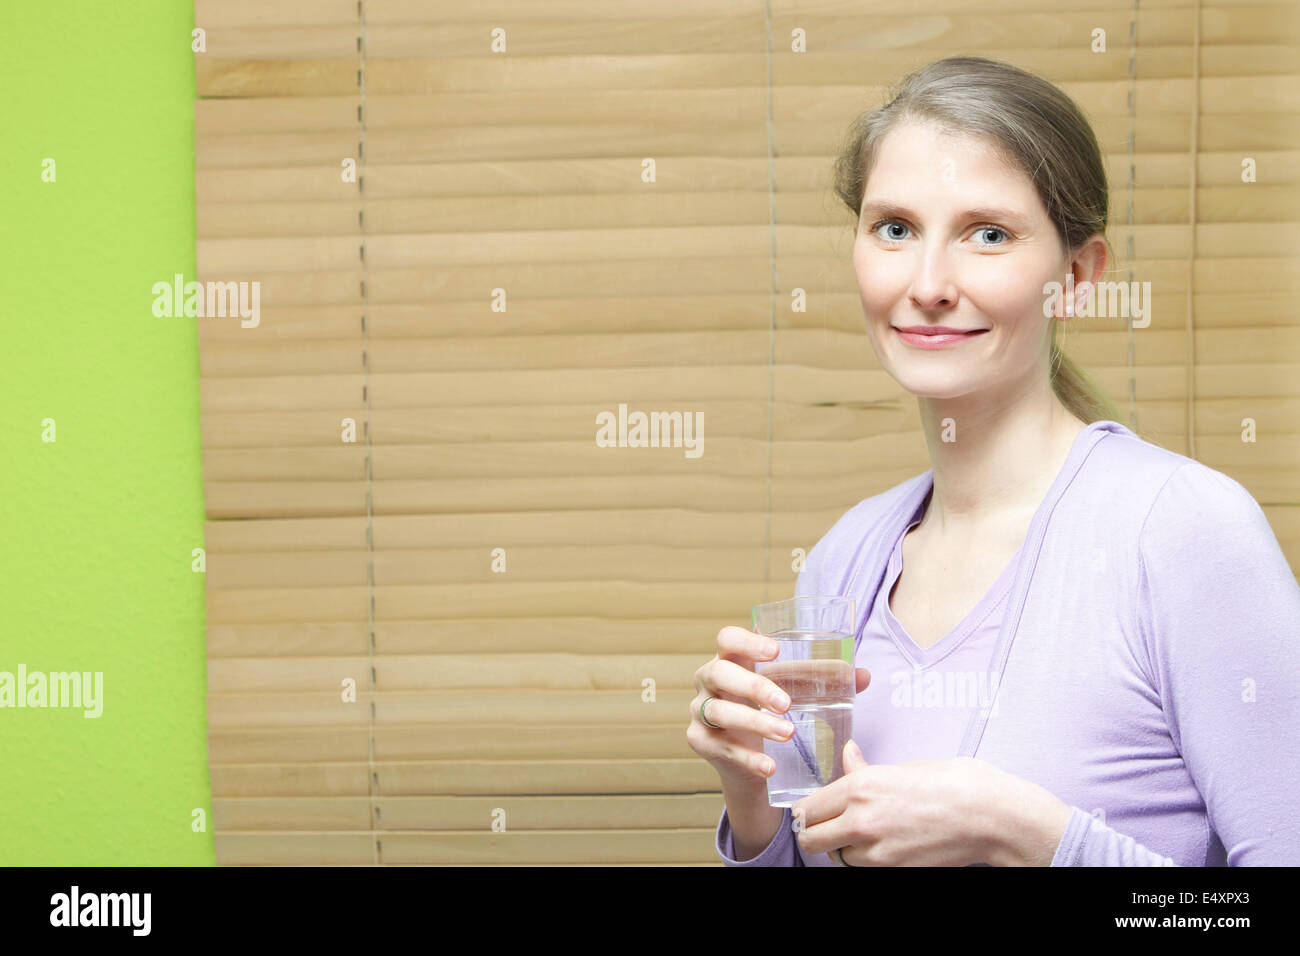 A young attractive woman holding a glass Stock Photo